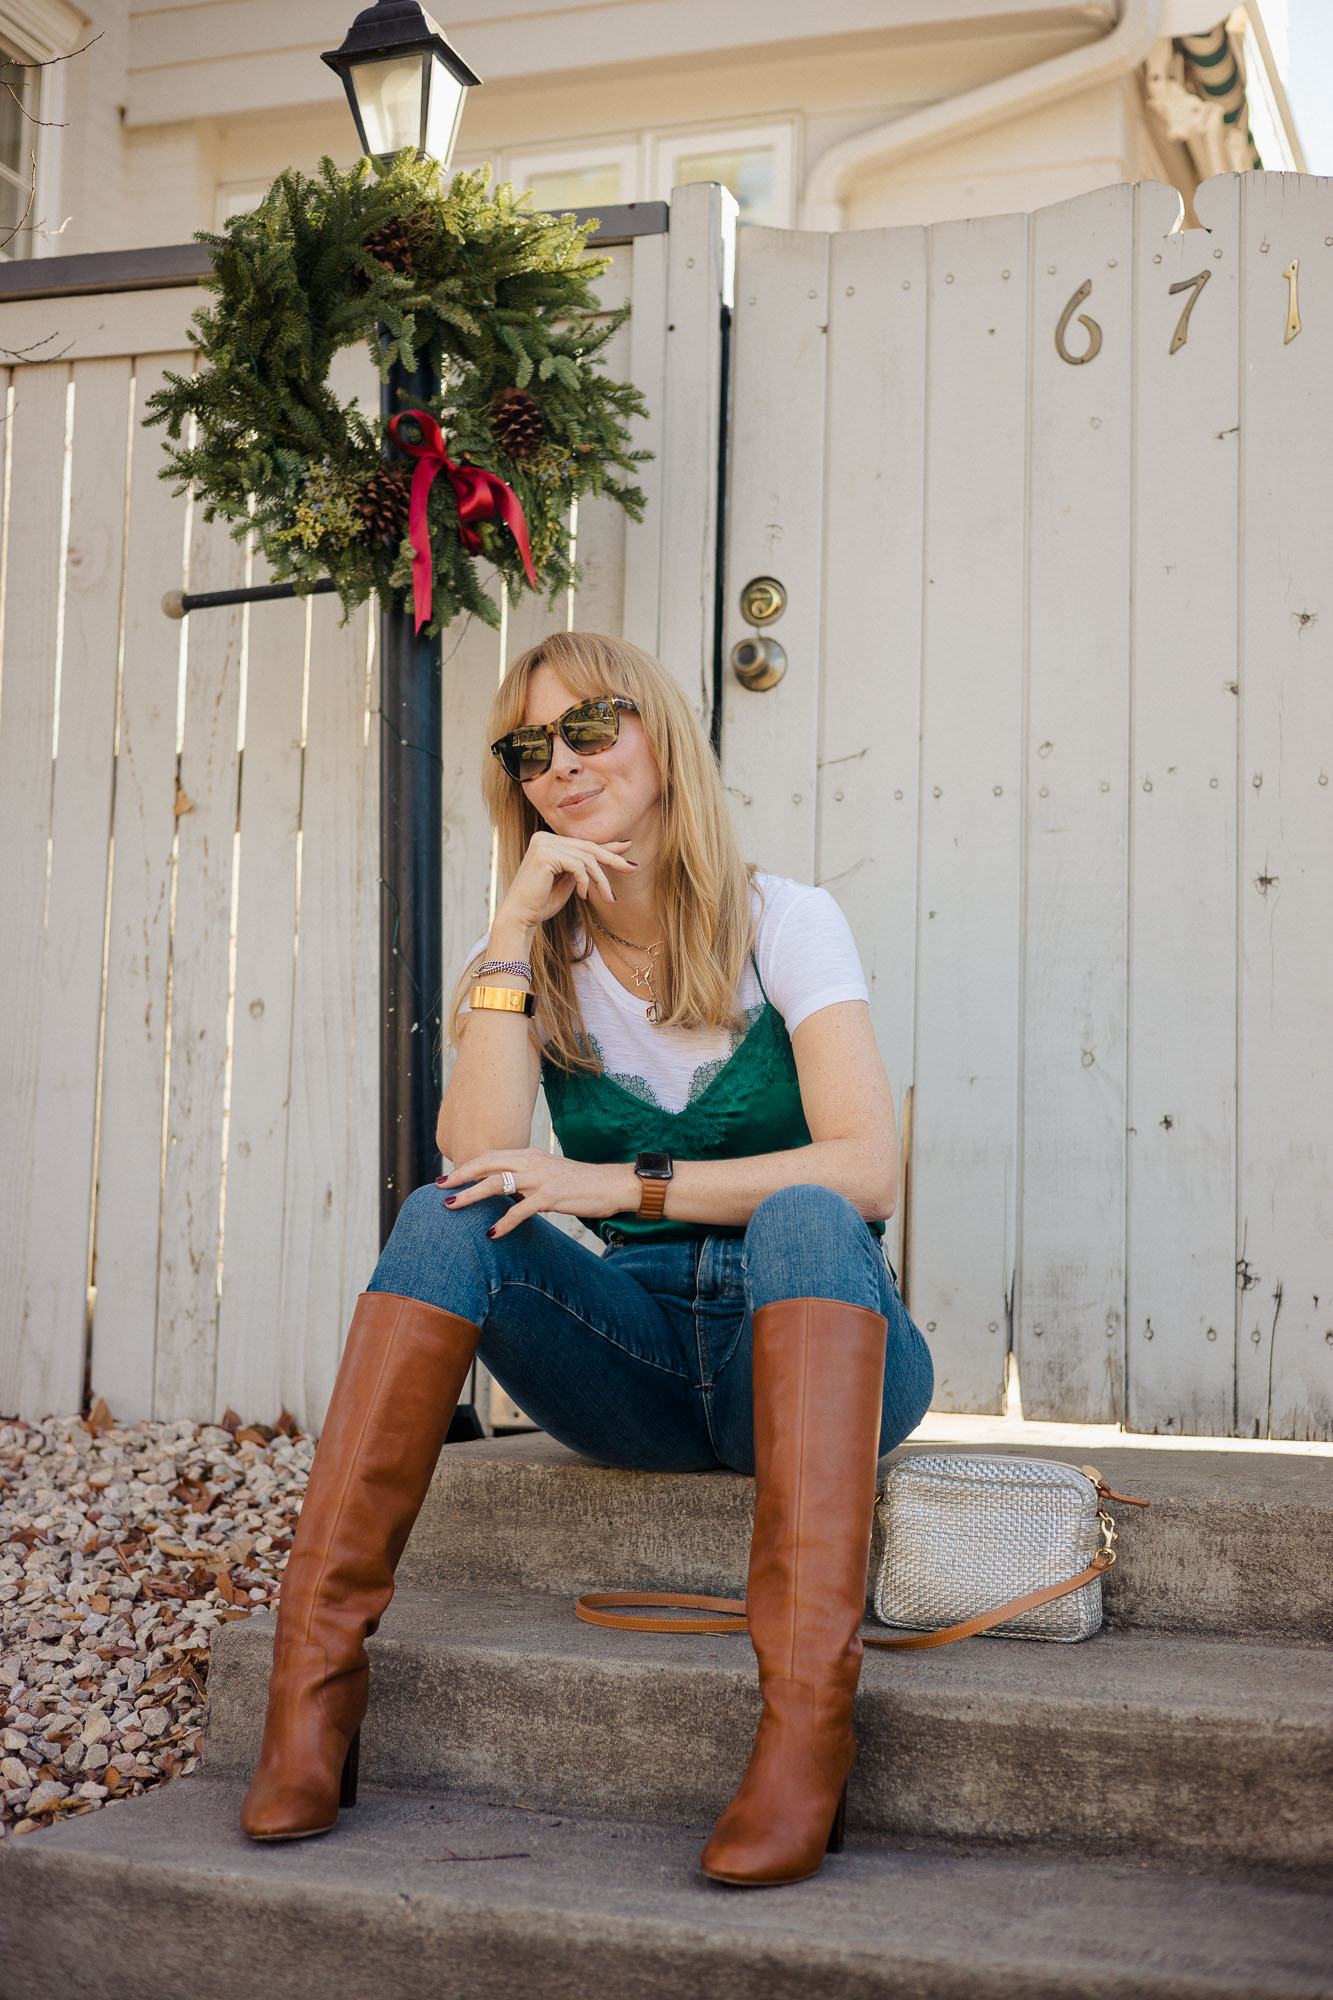 Wearing and emerald green silk camisole by Cami NYC over a white tee shirt with jeans and cognac Loeffler Randall Goldy boots.